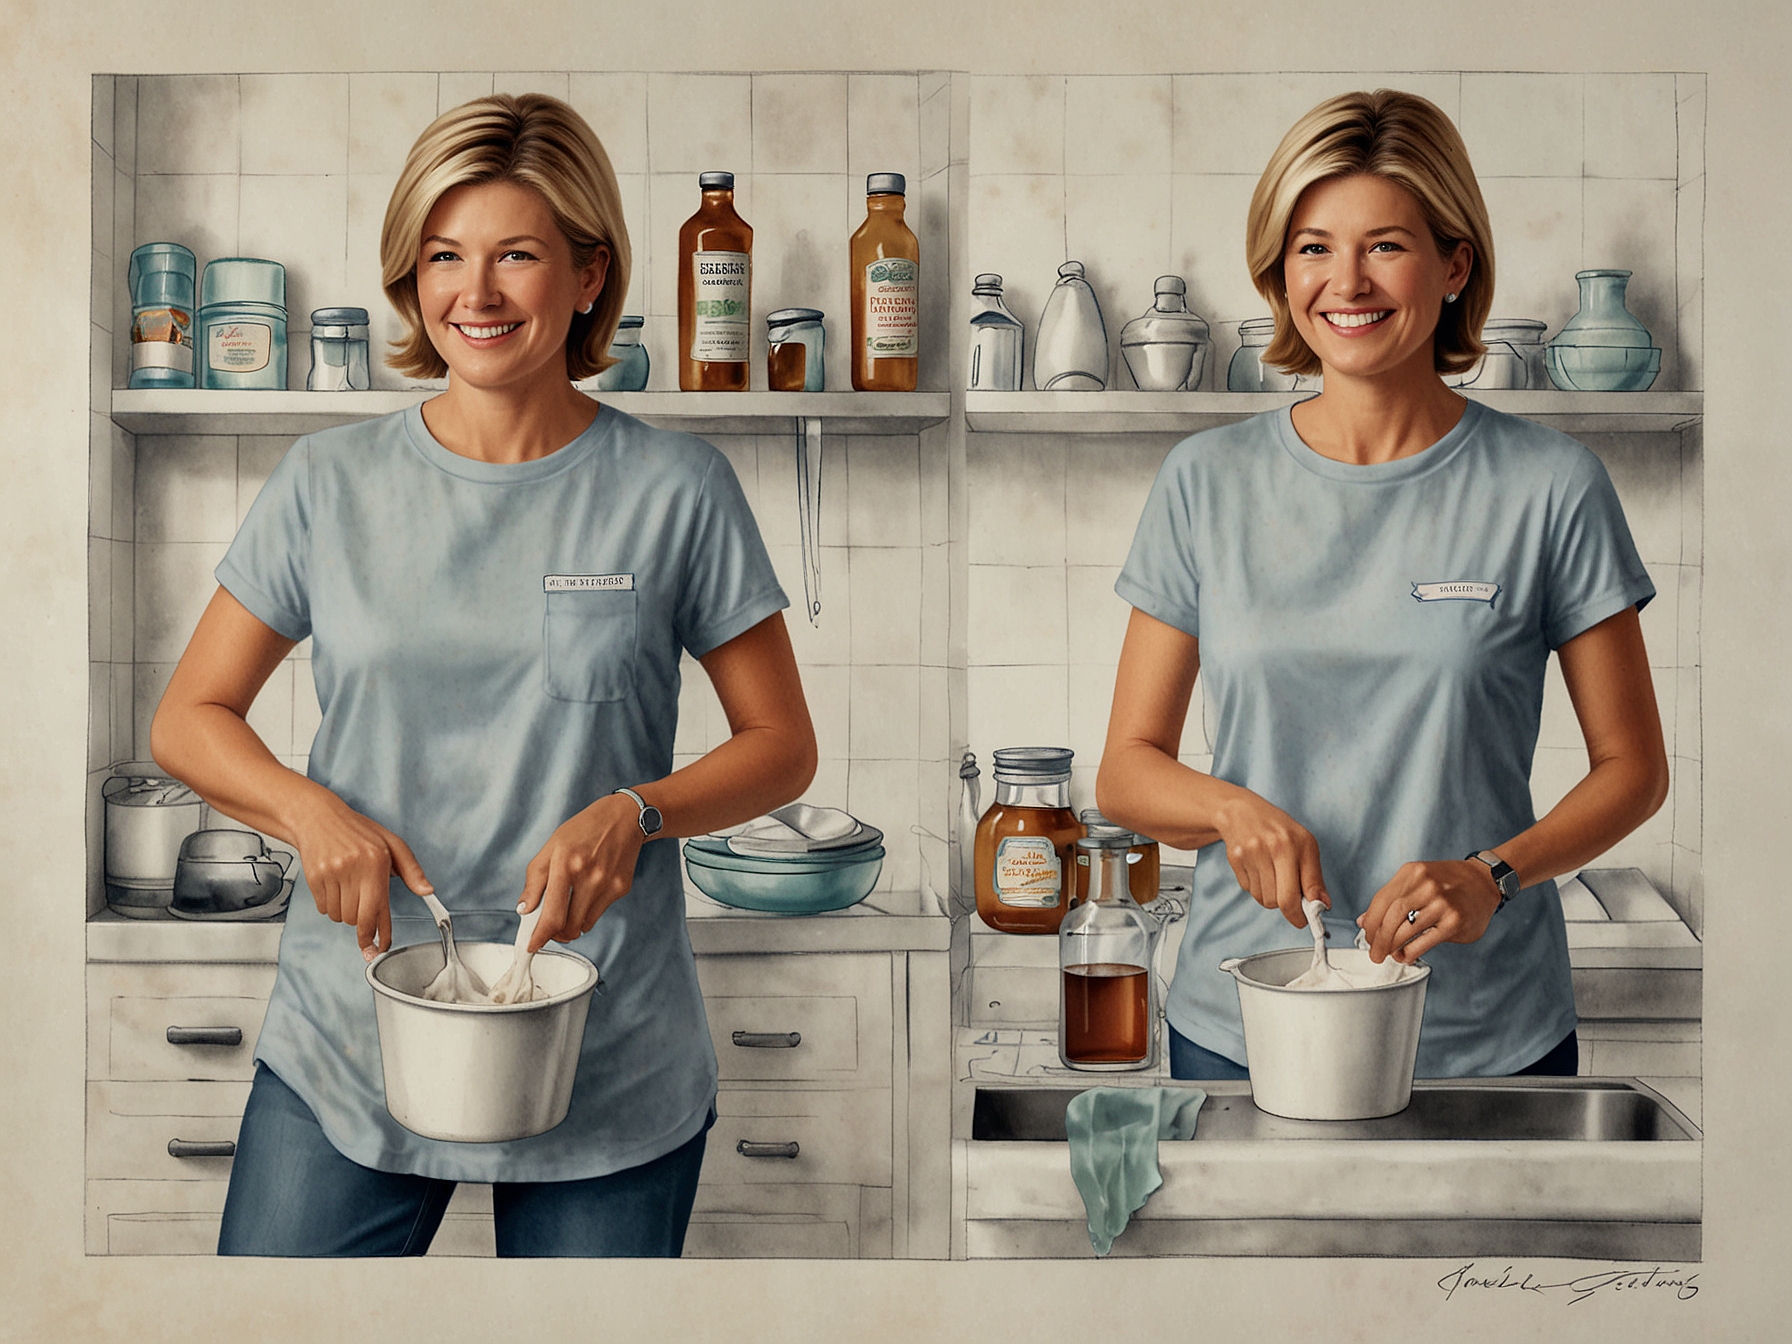 Graphic showing step-by-step process: applying vinegar to sweat-stained areas, spreading baking soda paste, and washing clothes, highlighting the practical steps in Martha Stewart's method.